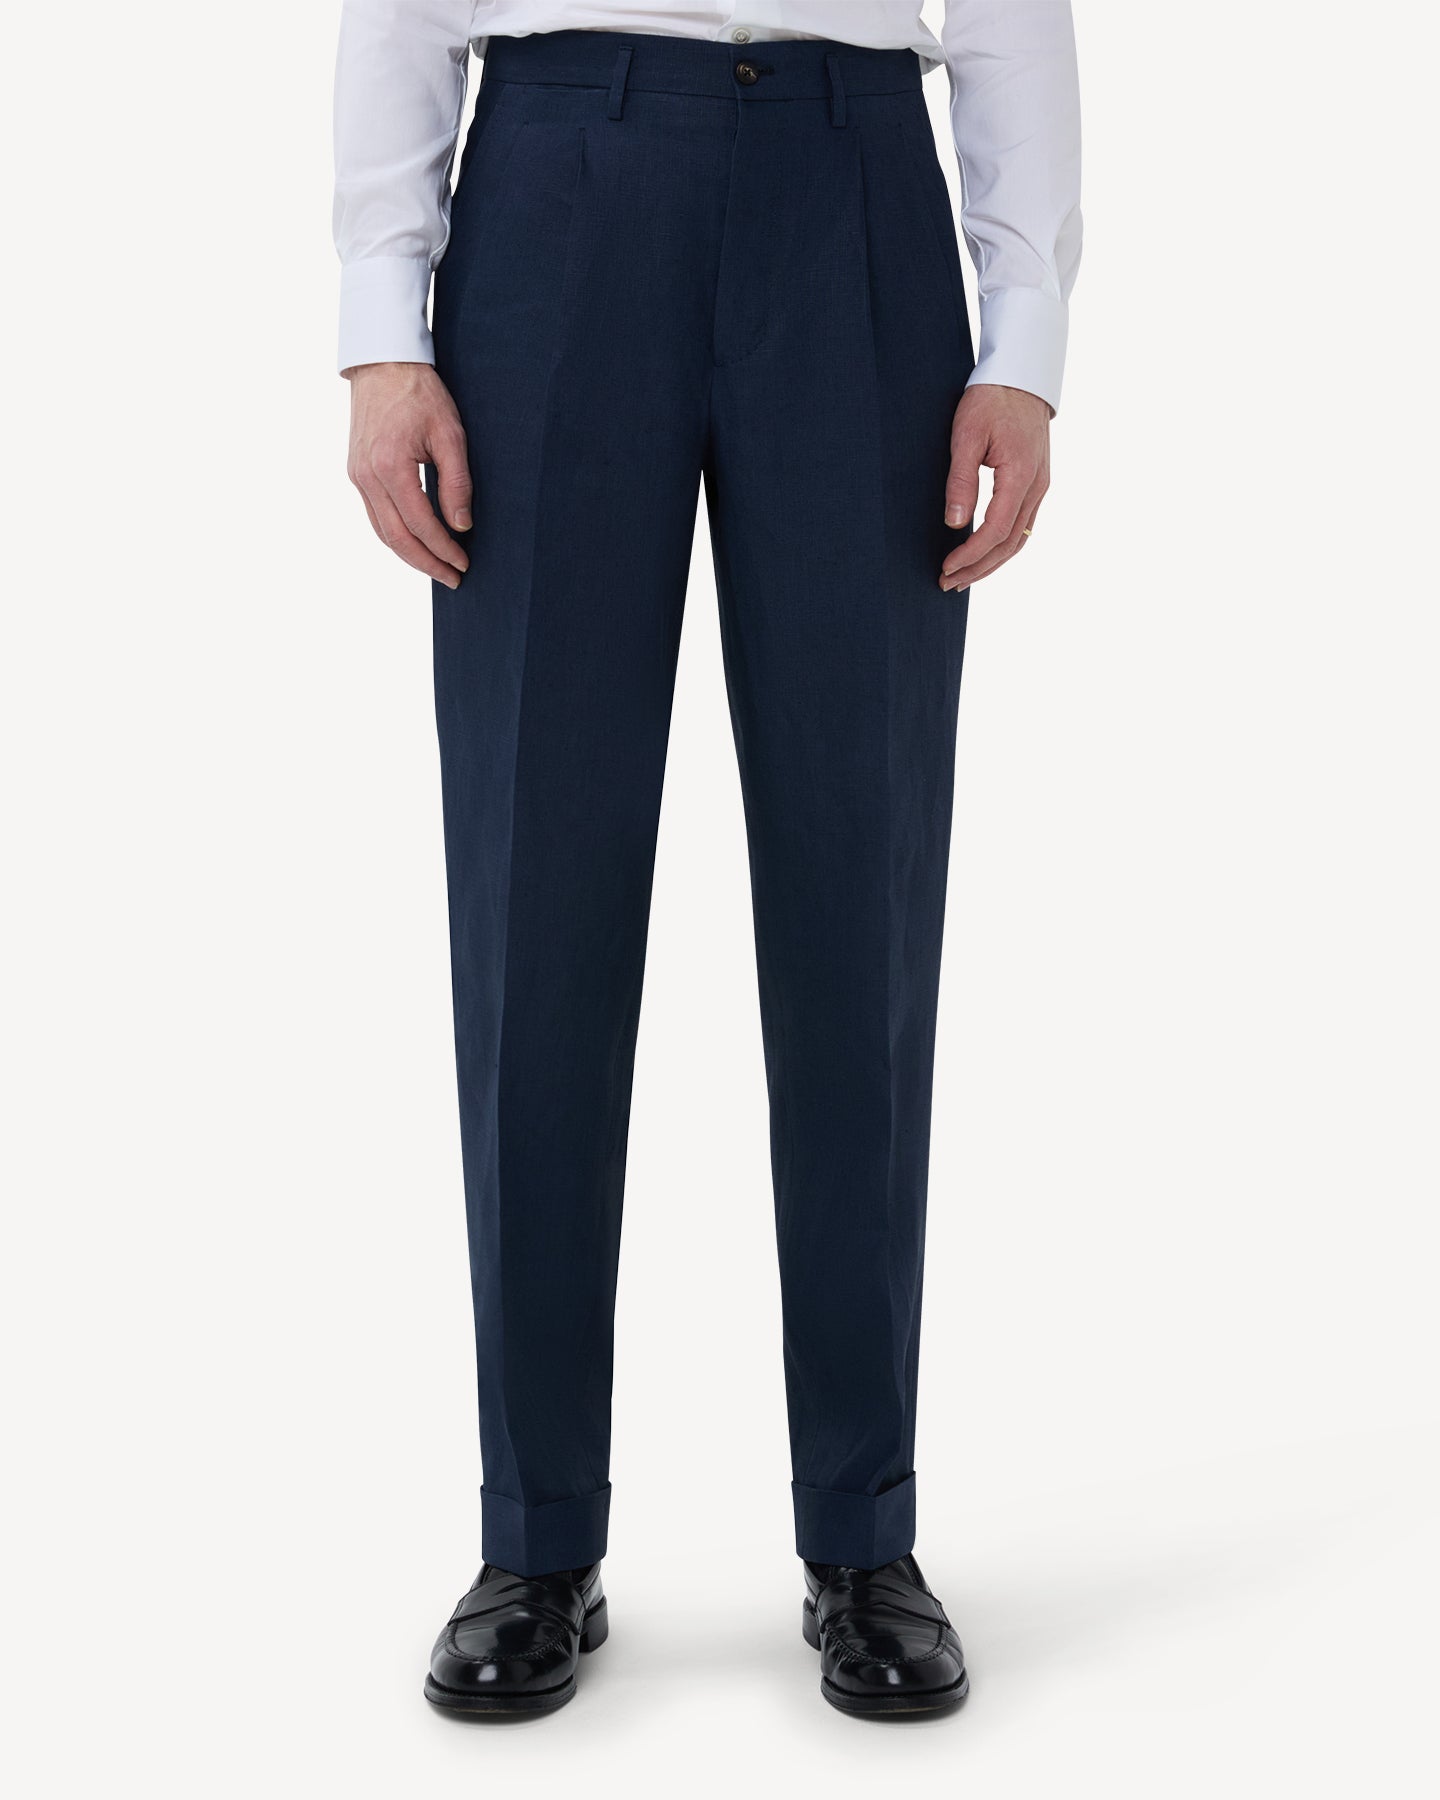 The front of navy linen trousers with double pleats and belt loops